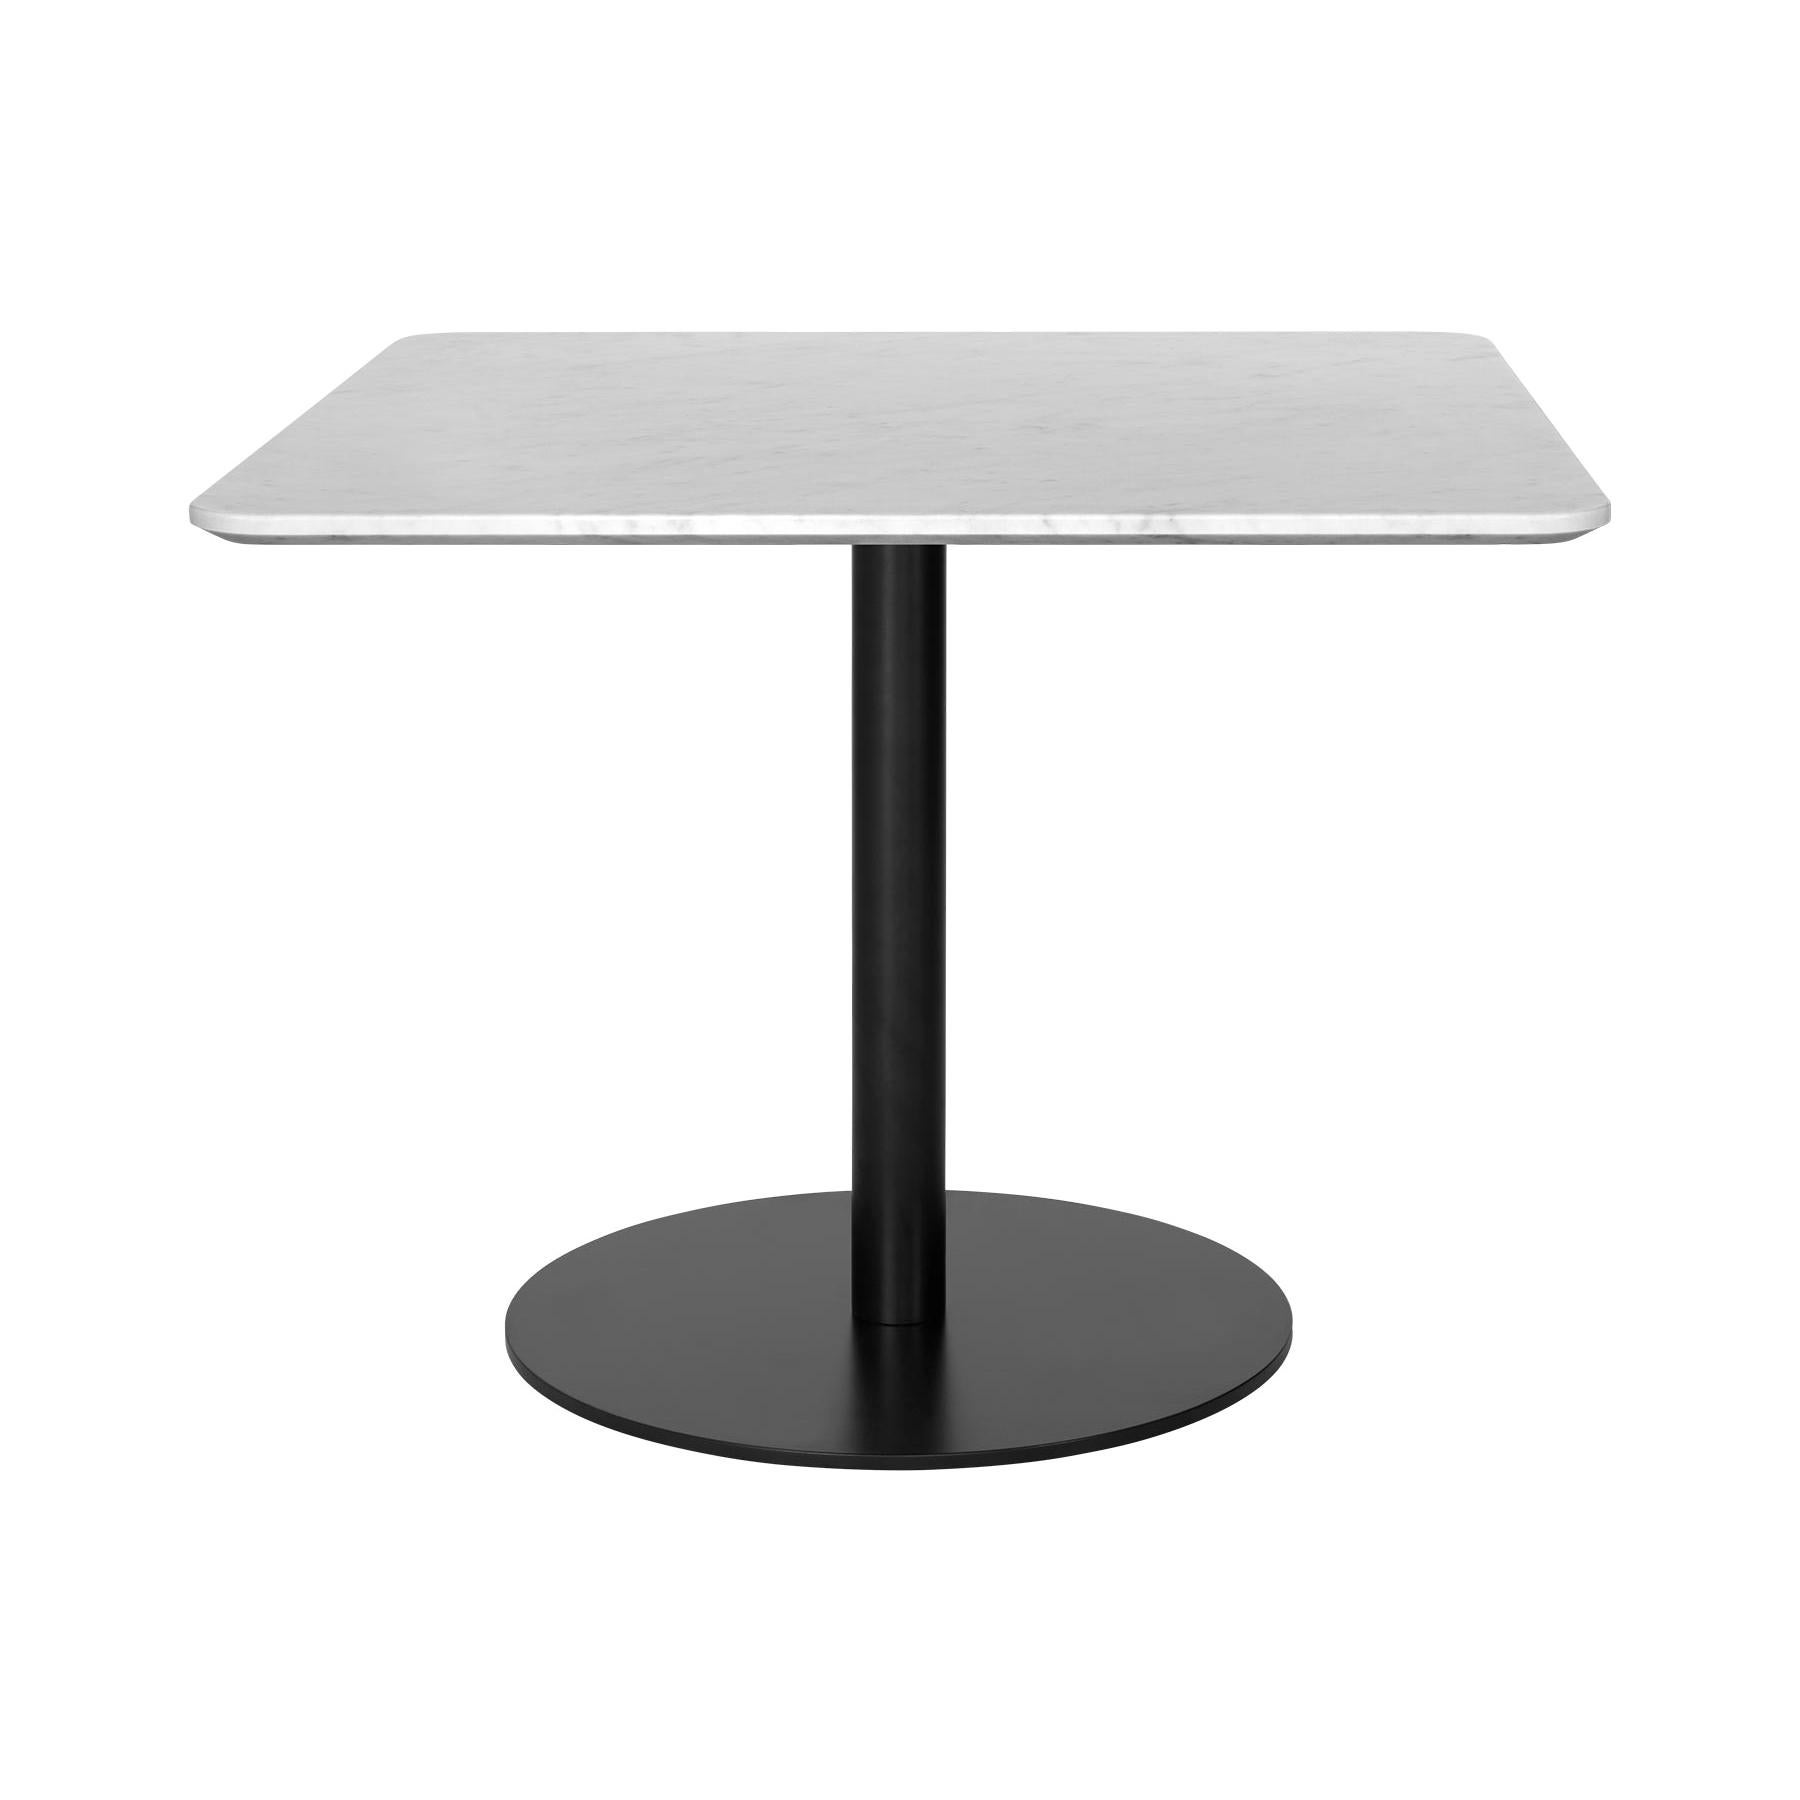 1.0 Lounge Table, Square, Round Black Base, Medium, Marble For Sale